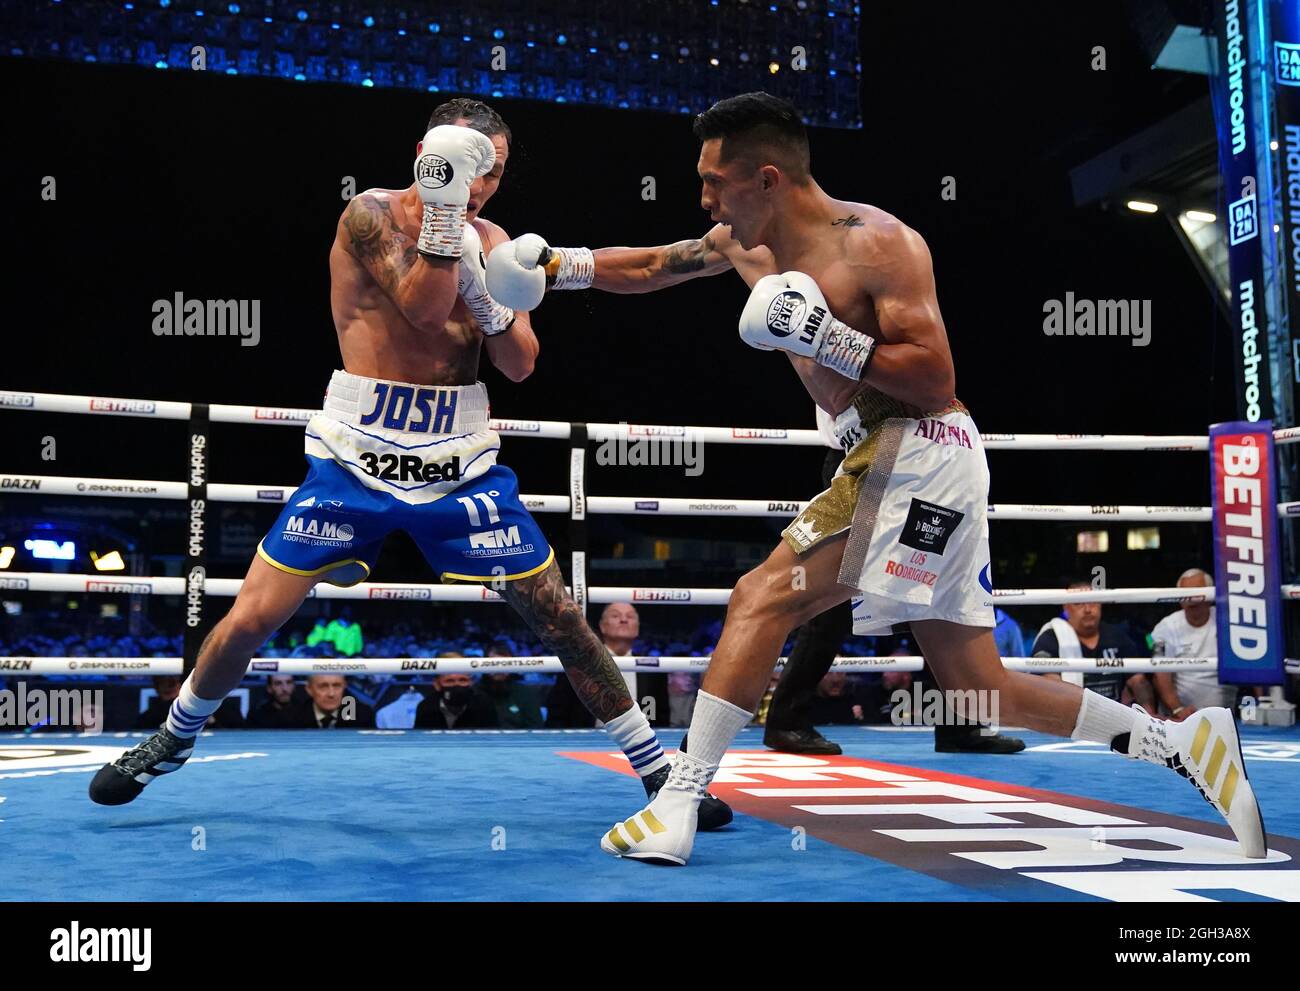 Josh Warrington (left) and Mauricio Lara in their International Featherweight contest contest during the boxing event at the Emerald Headingley Stadium, Leeds. Picture date: Saturday September 4, 2021. Stock Photo